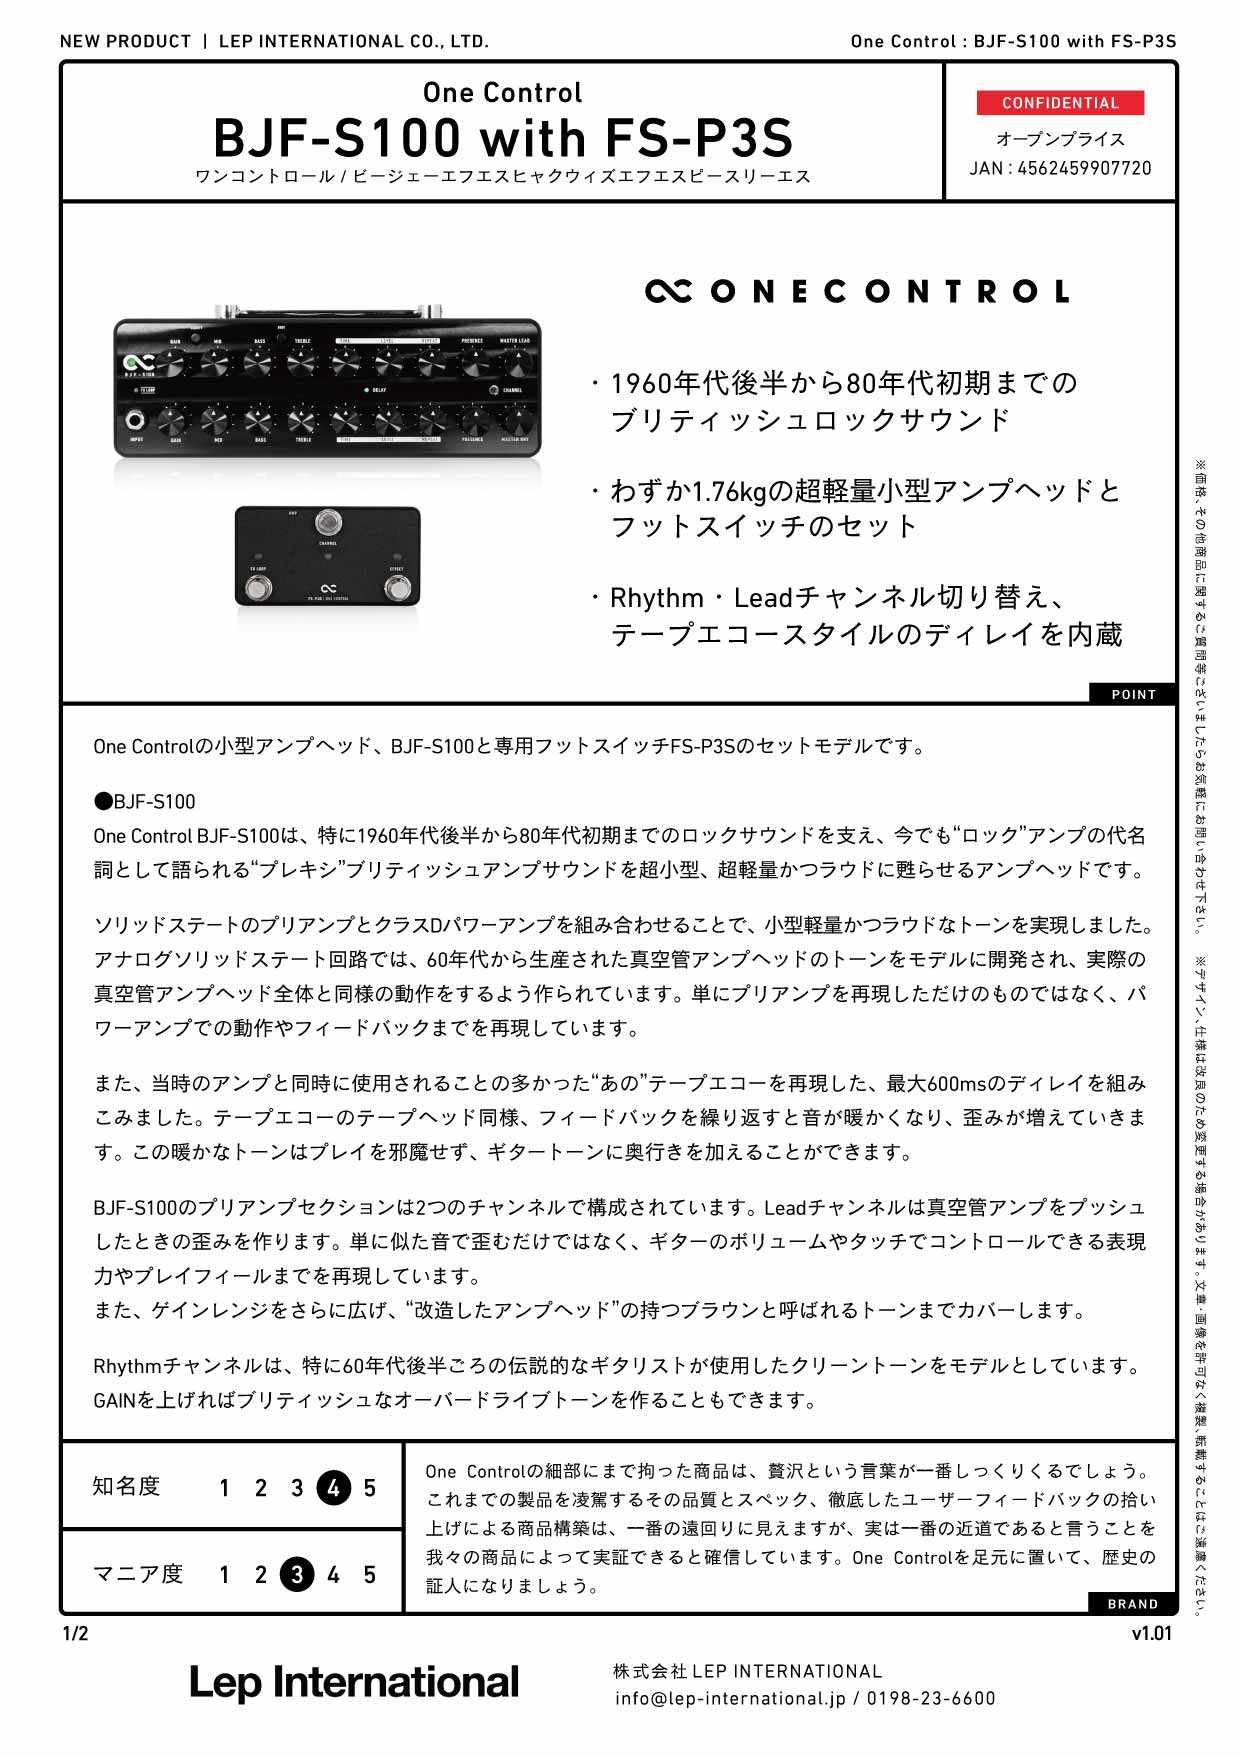 One Control / BJF-S100 with FS-P3S